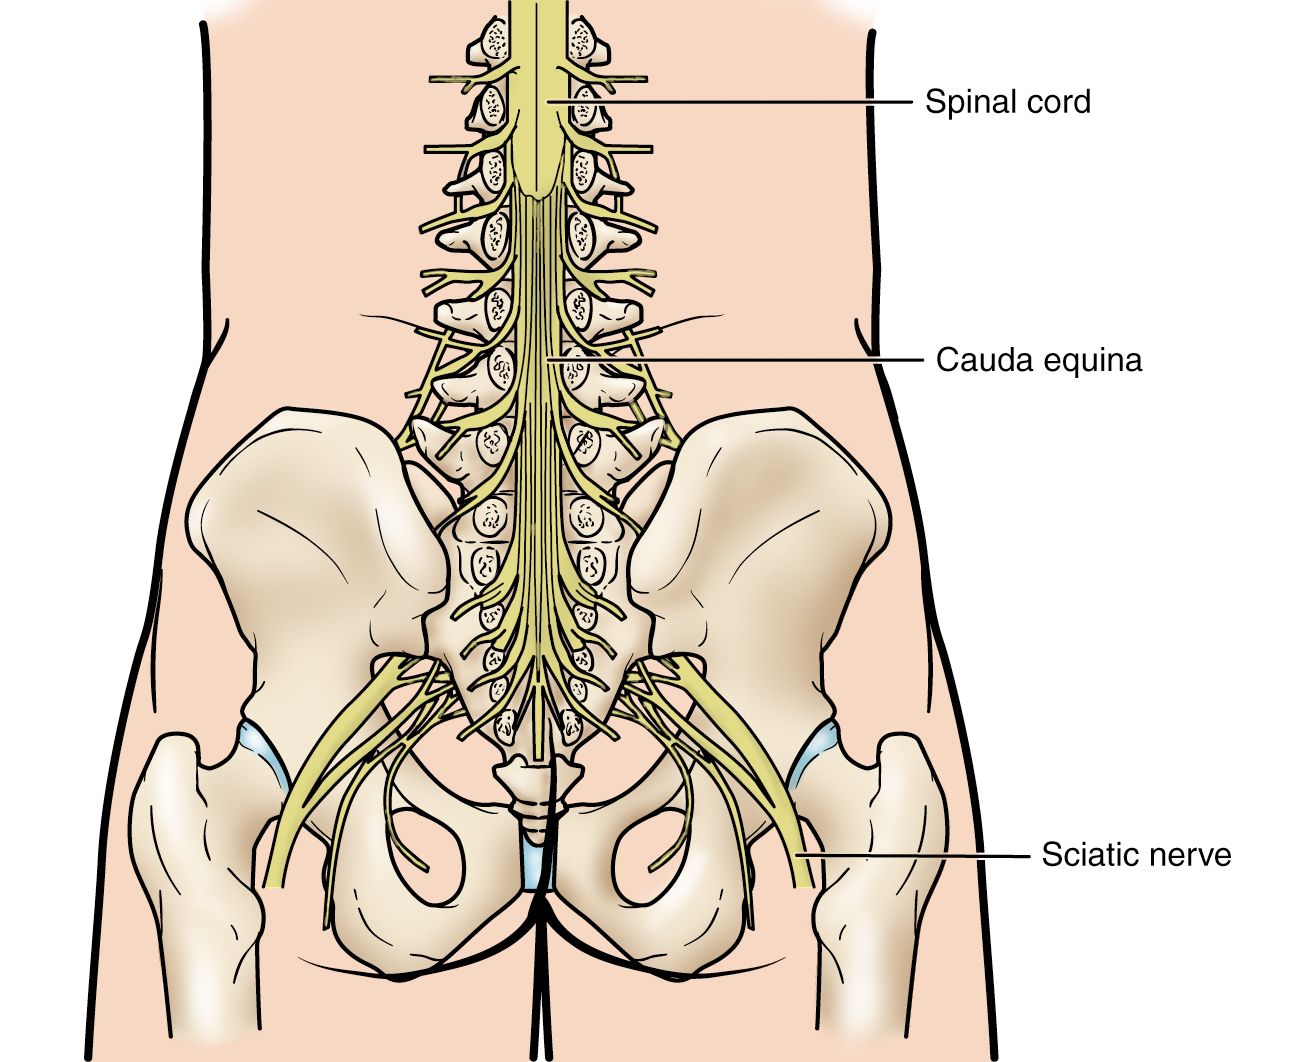 The cauda equina in the lower spine